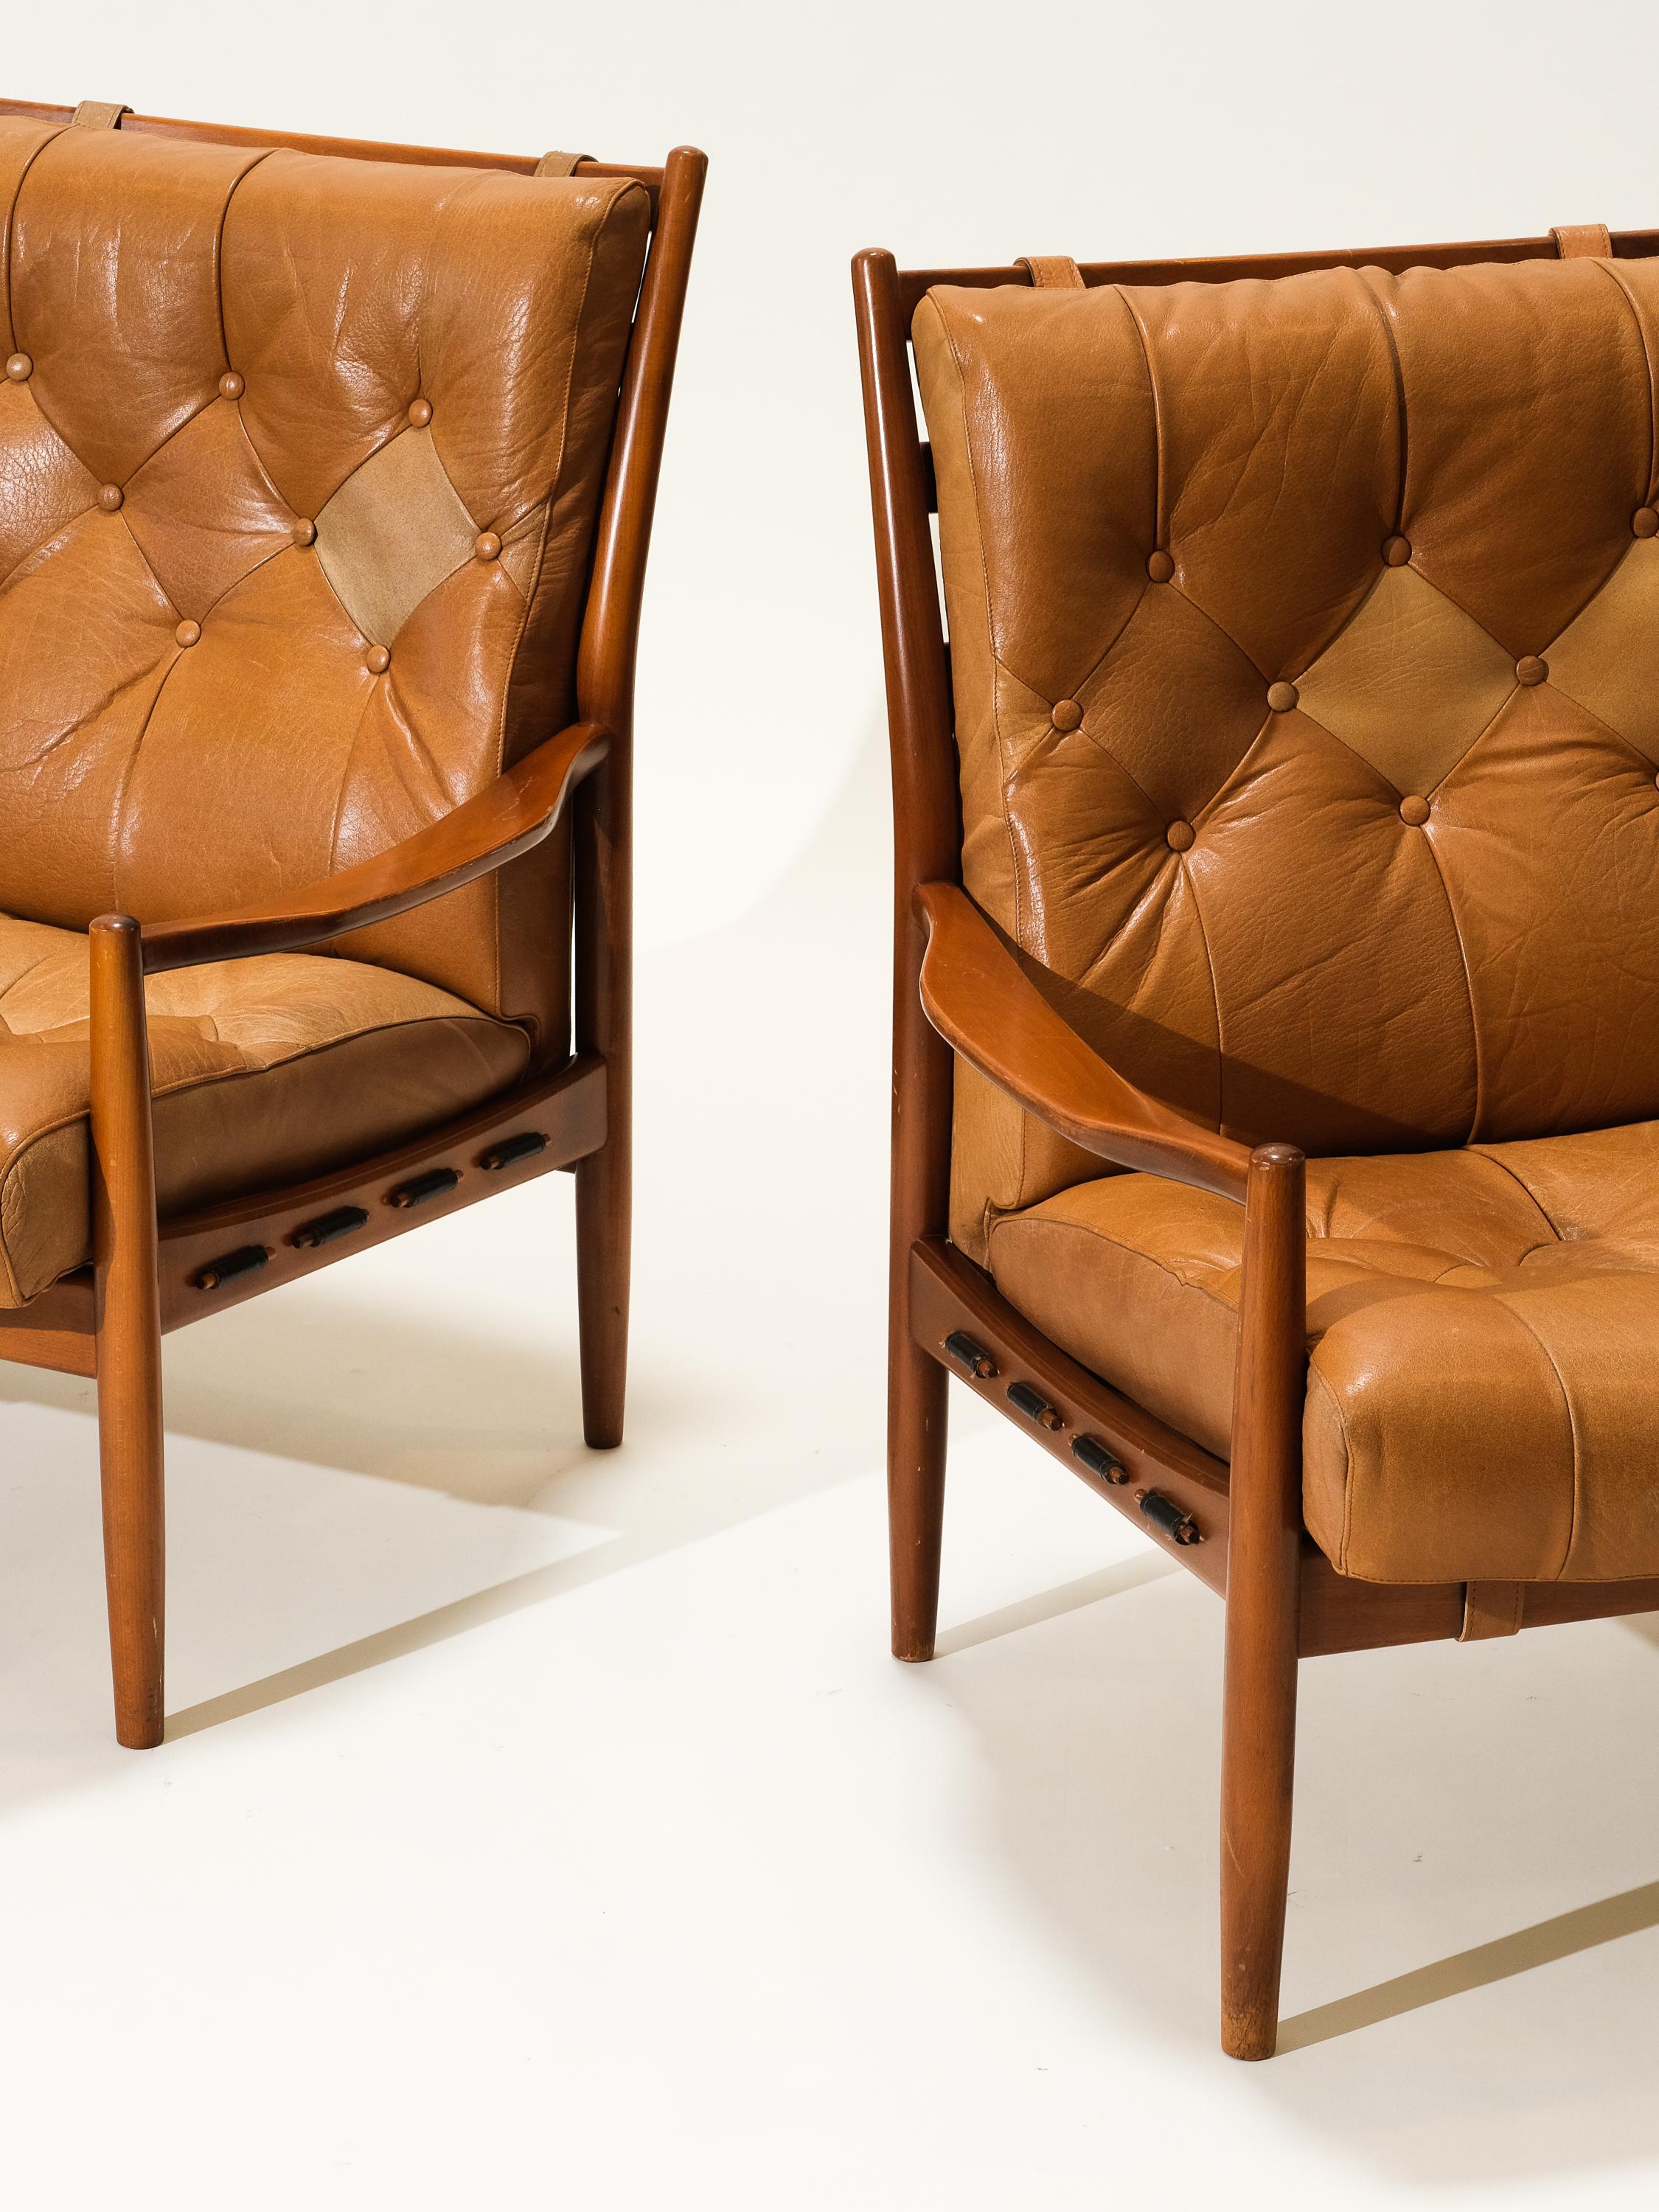 “Läckö” lounge chairs by Swedish designer Ingemar Thillmark. Chairs are manufactured by OPE furniture, Olof Persson Möbler, in Jönköping during the second half of the 20th century.

The frame is made from stained beech and the chairs have two loose